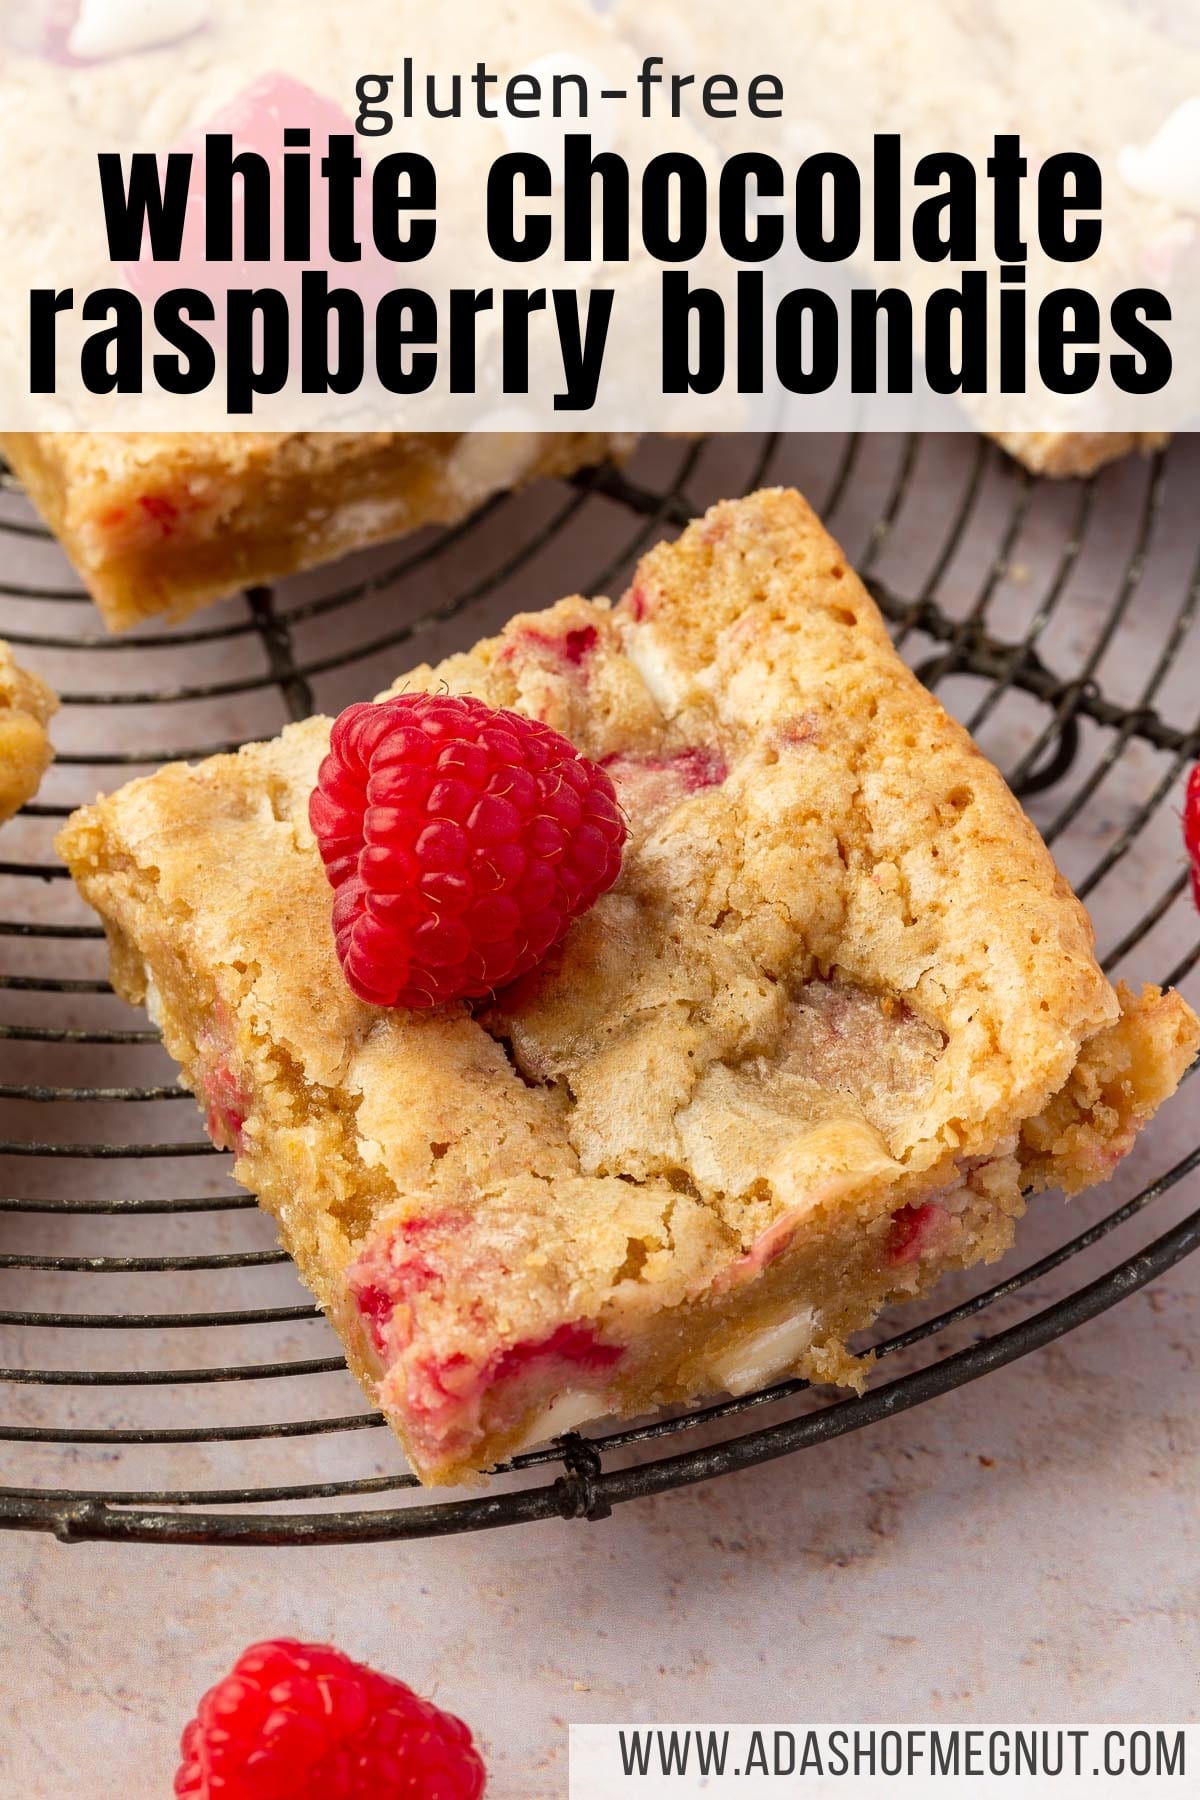 A single gluten free blondie with raspberries and white chocolate chips on a wire cooling rack.